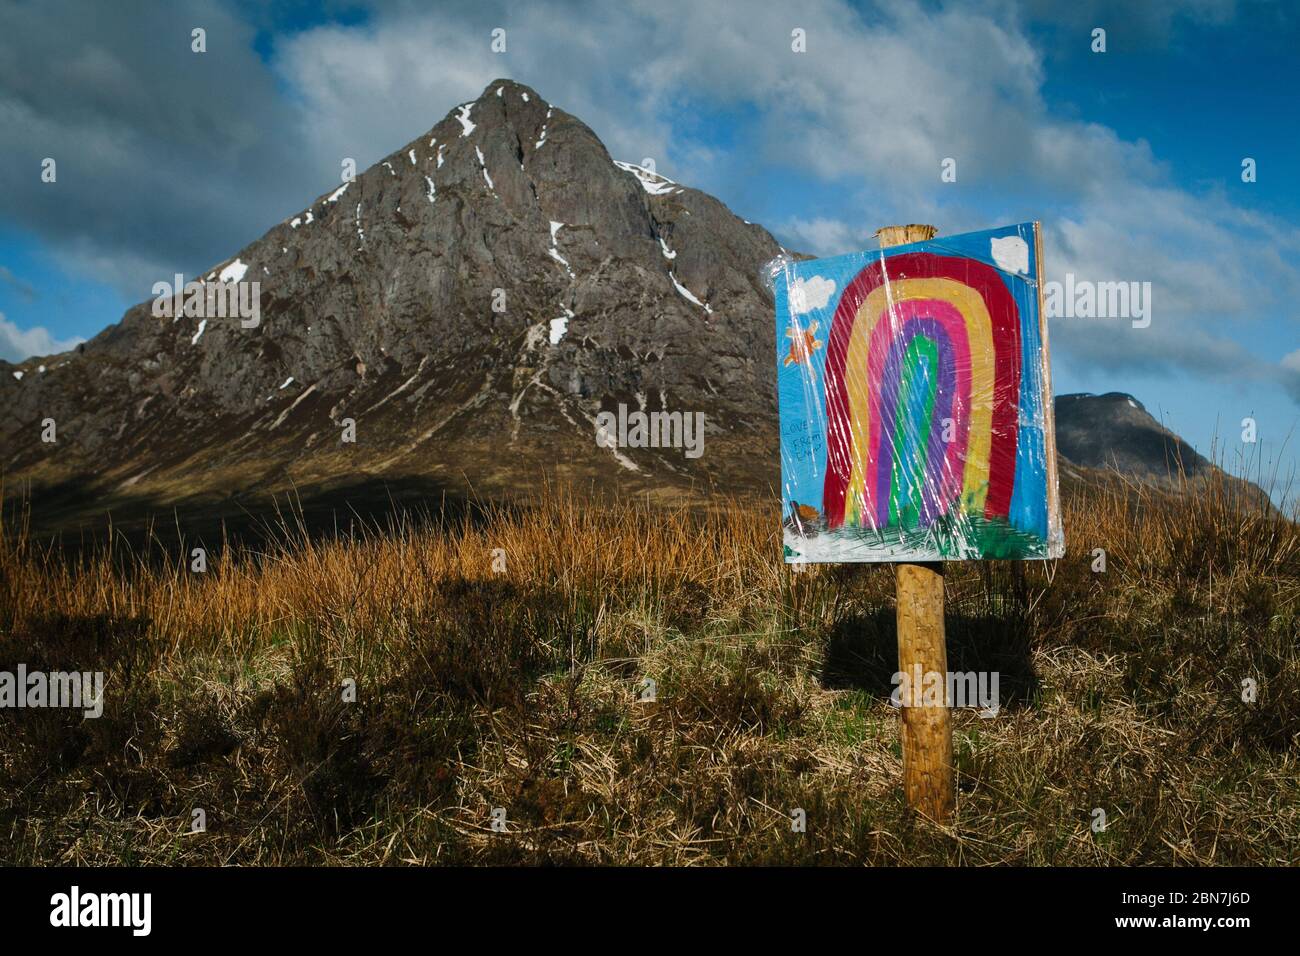 A rainbow painted on a sign by a child, in front of the Buachaille Etive Mor, in Glencoe, Scotland, during the Corona Virus pandemic lockdown. Stock Photo